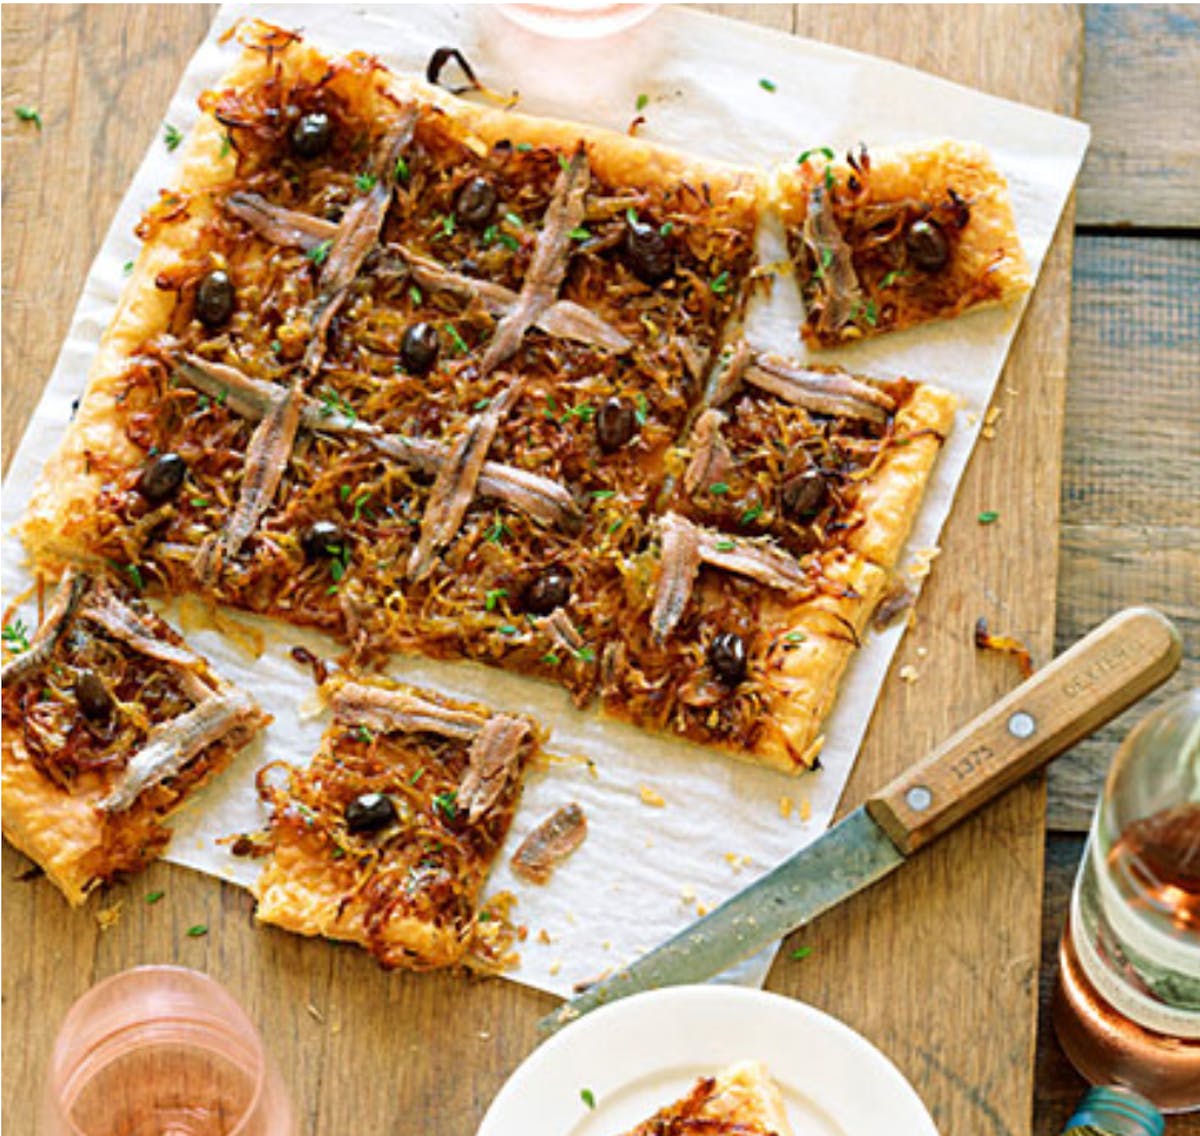 Pissaladière sliced into squares with a knife next to it